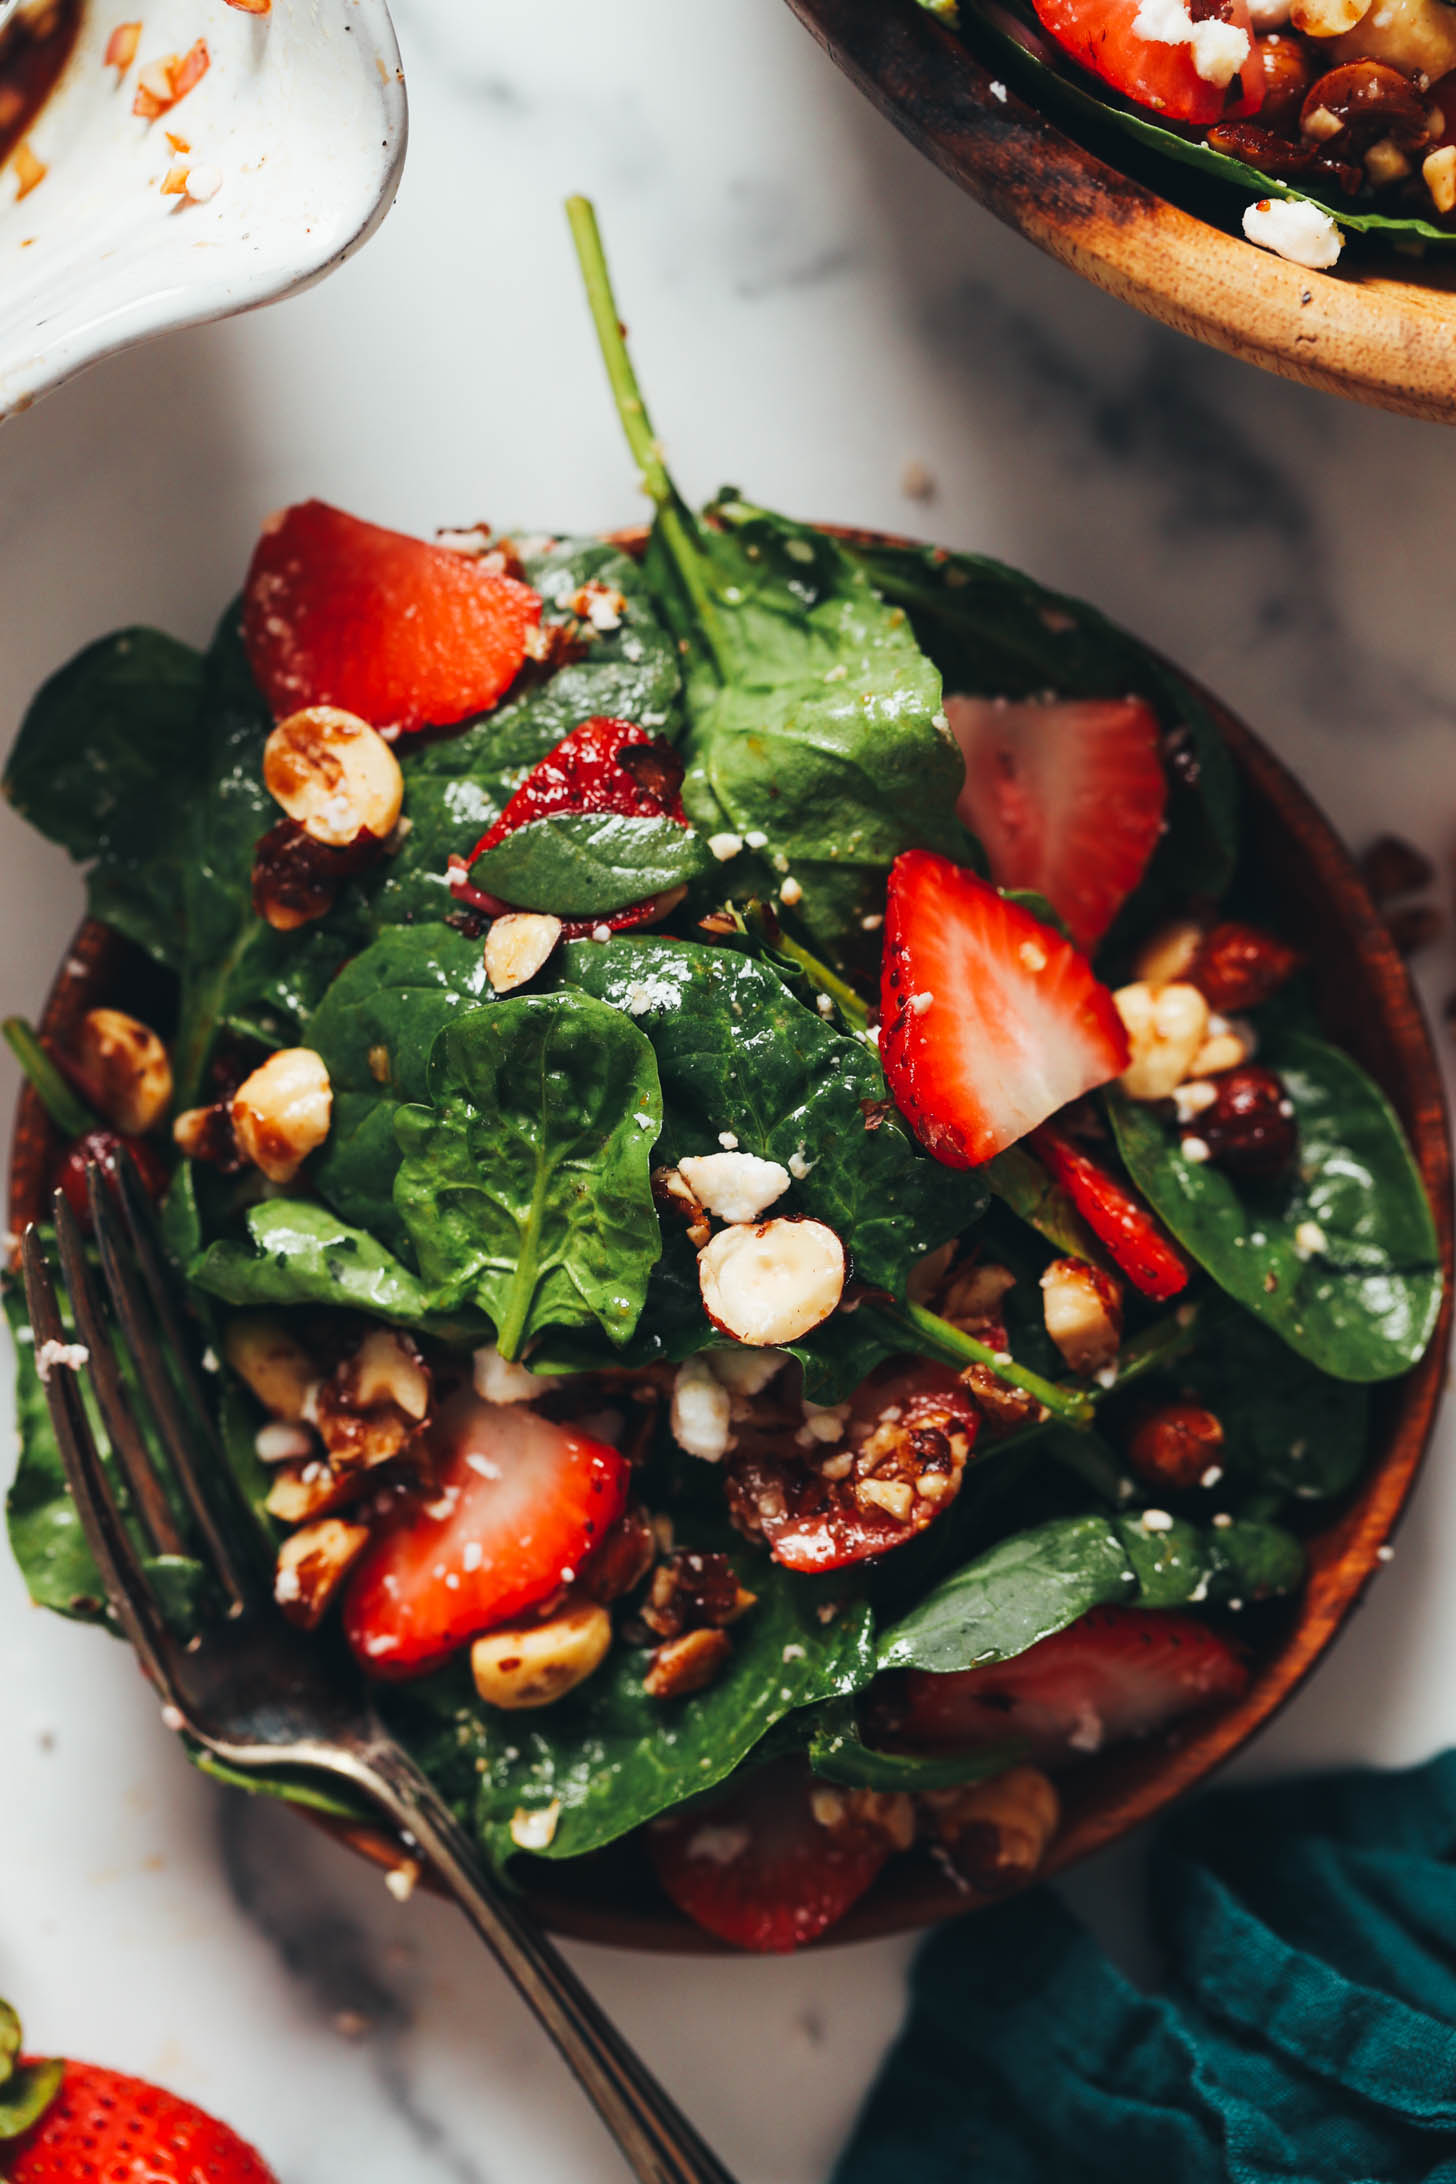 Plate of strawberry spinach salad with candied hazelnuts